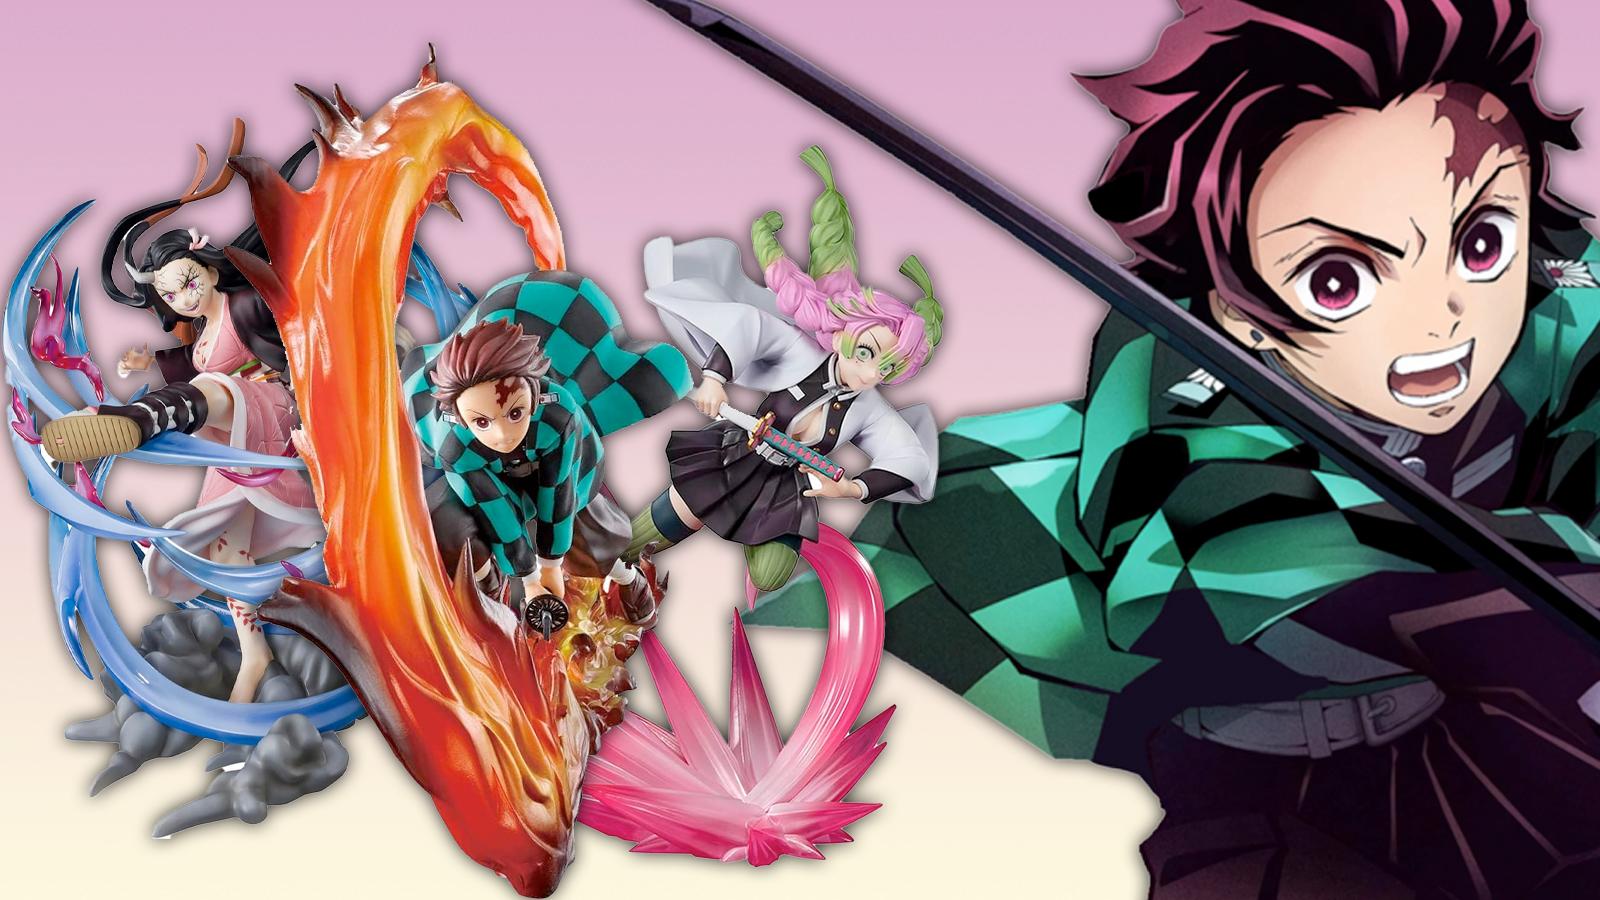 demon slayer characters and figures on a pink background